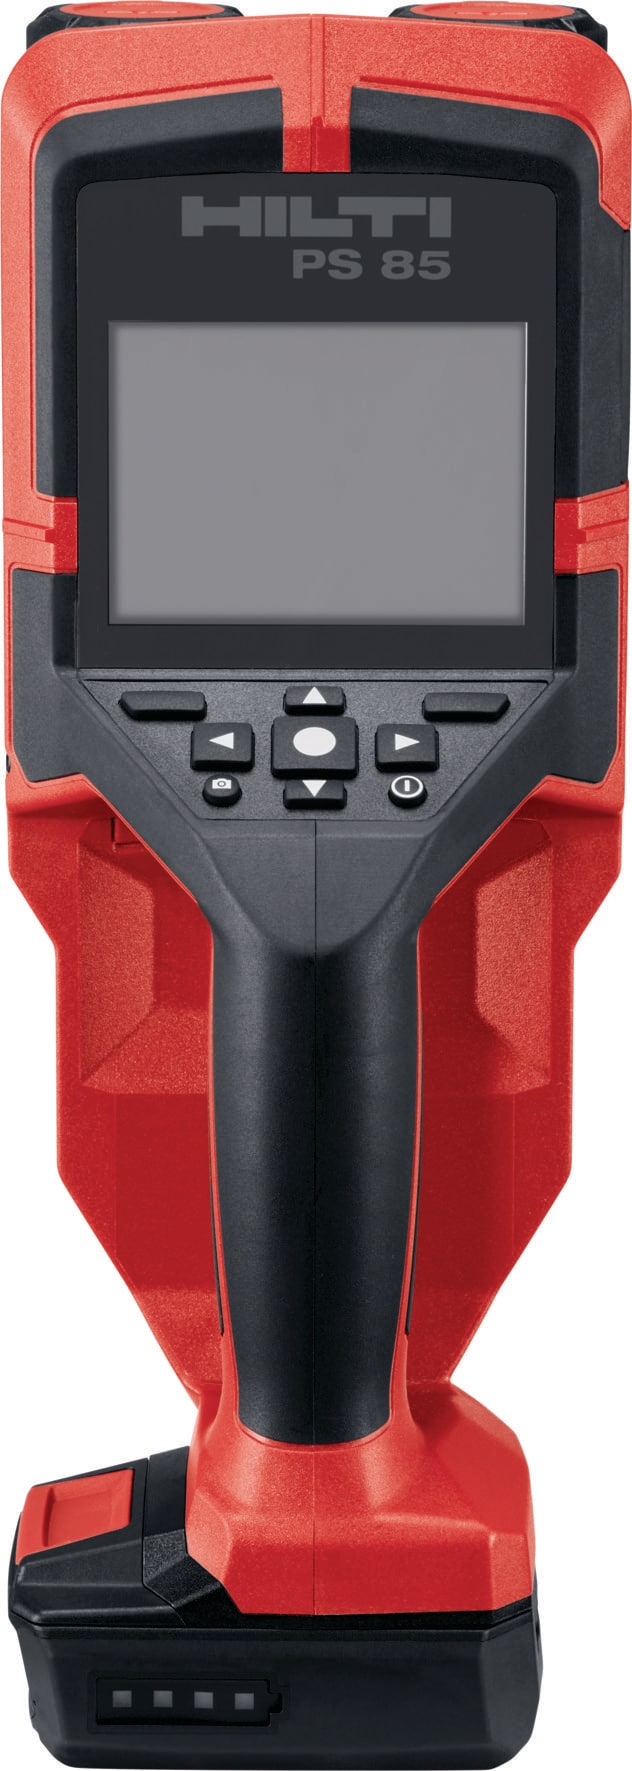 PS 85 Wall scanner - Concrete scanners and sensors - Hilti Canada